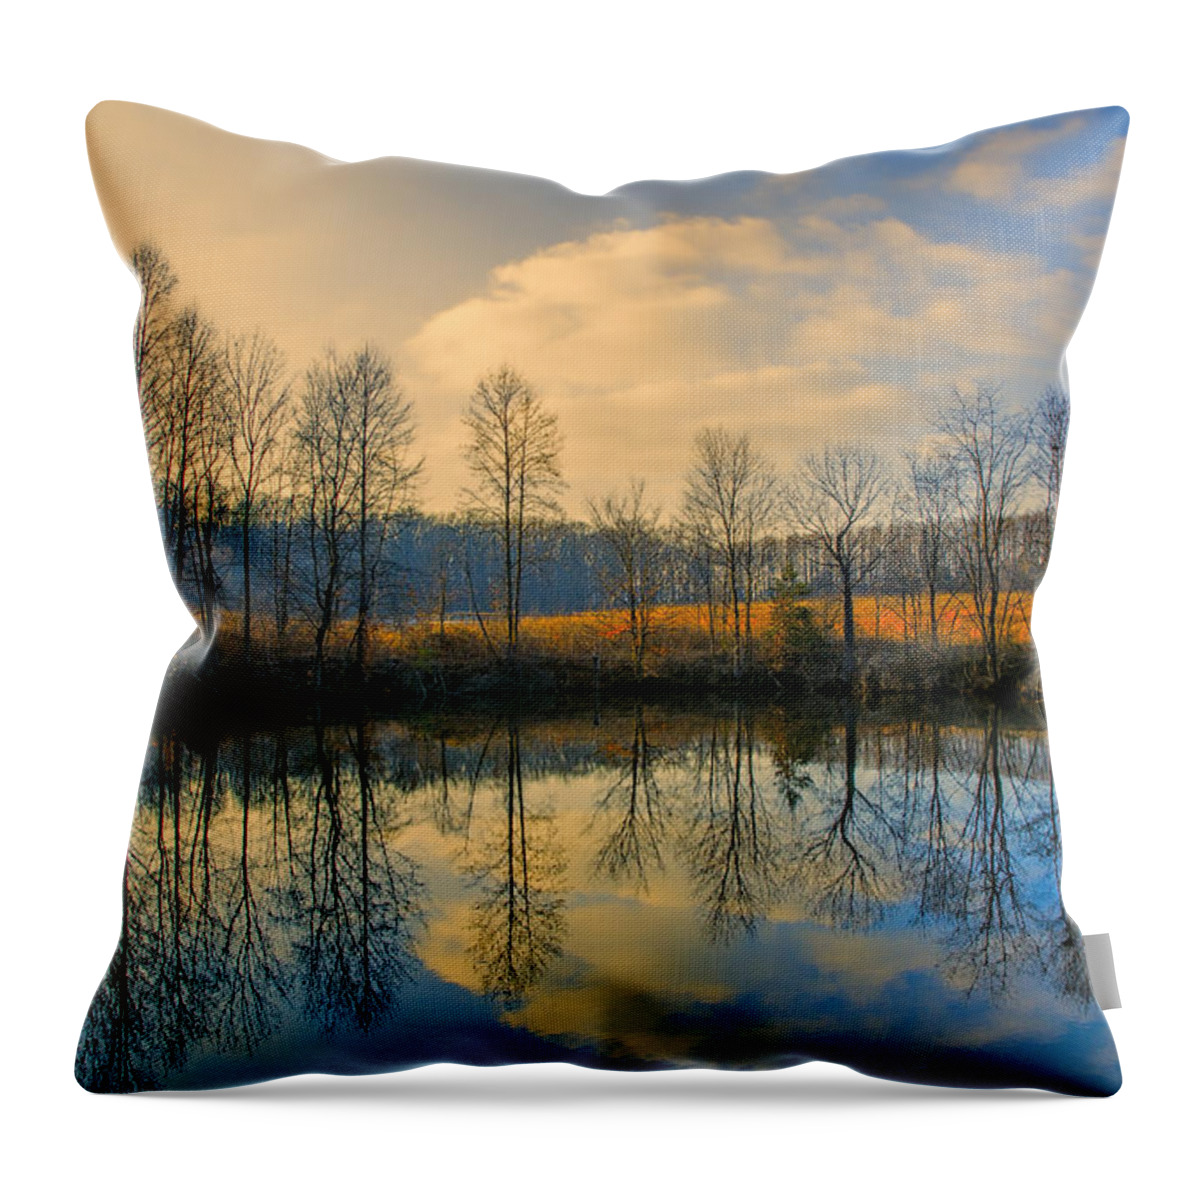 Reflection Throw Pillow featuring the photograph Reflect by John Rivera